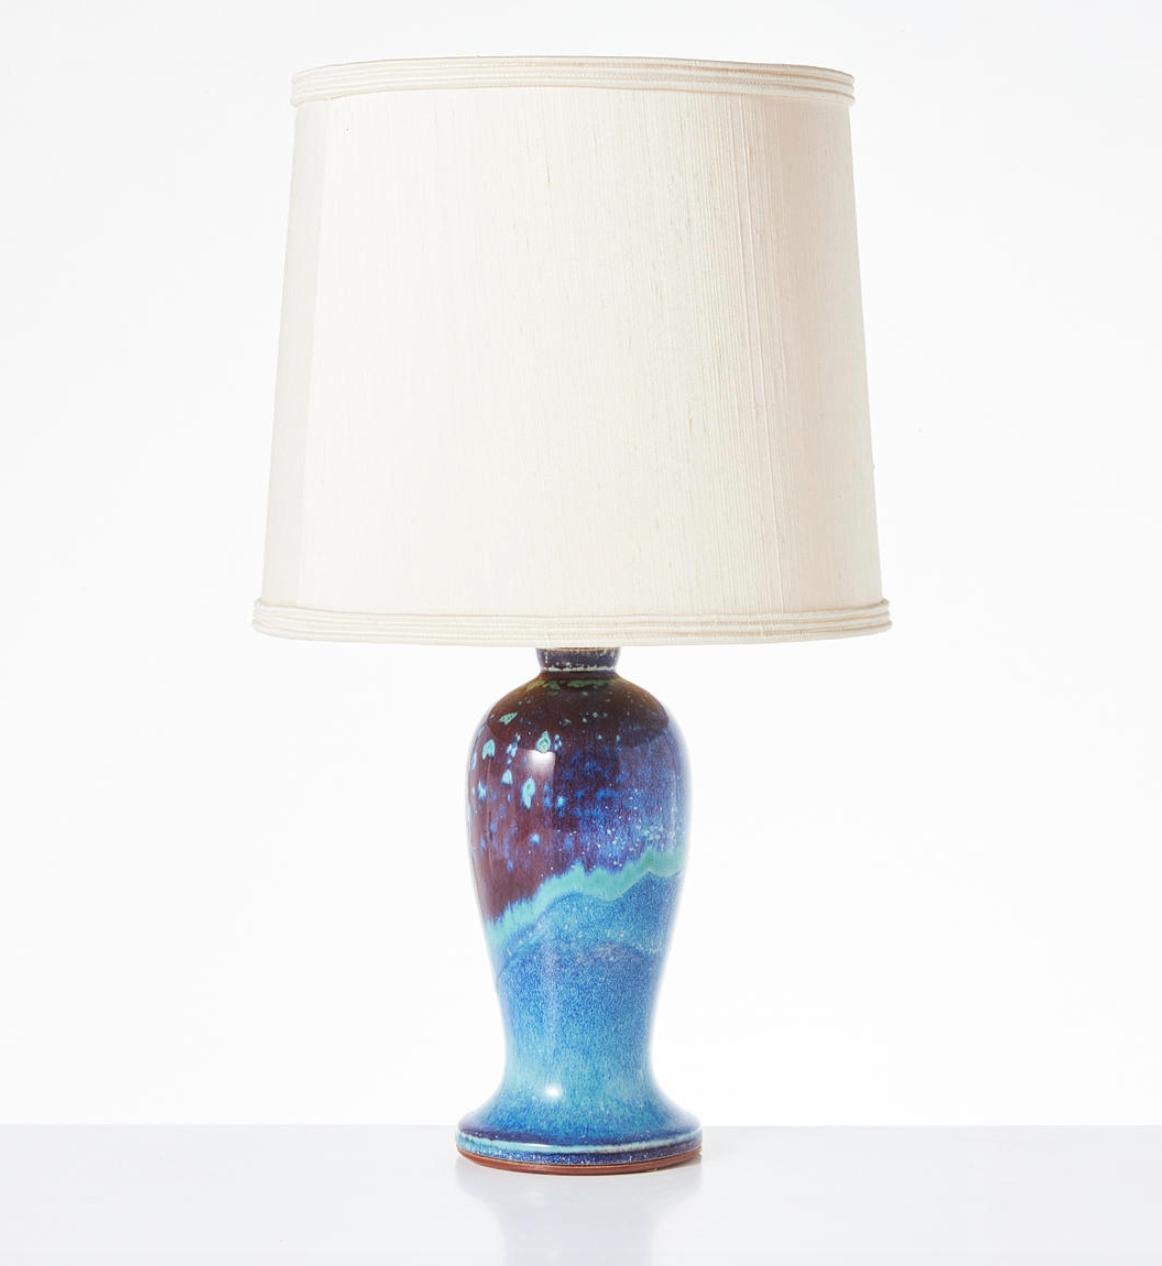 A table lamp by Bernd Friberg for Gustavber Studio. Sweden.
Aniaga glazed in turquoise/blue shades signed Friberg with the studio hand, dated 1976. Stoneware base H 9